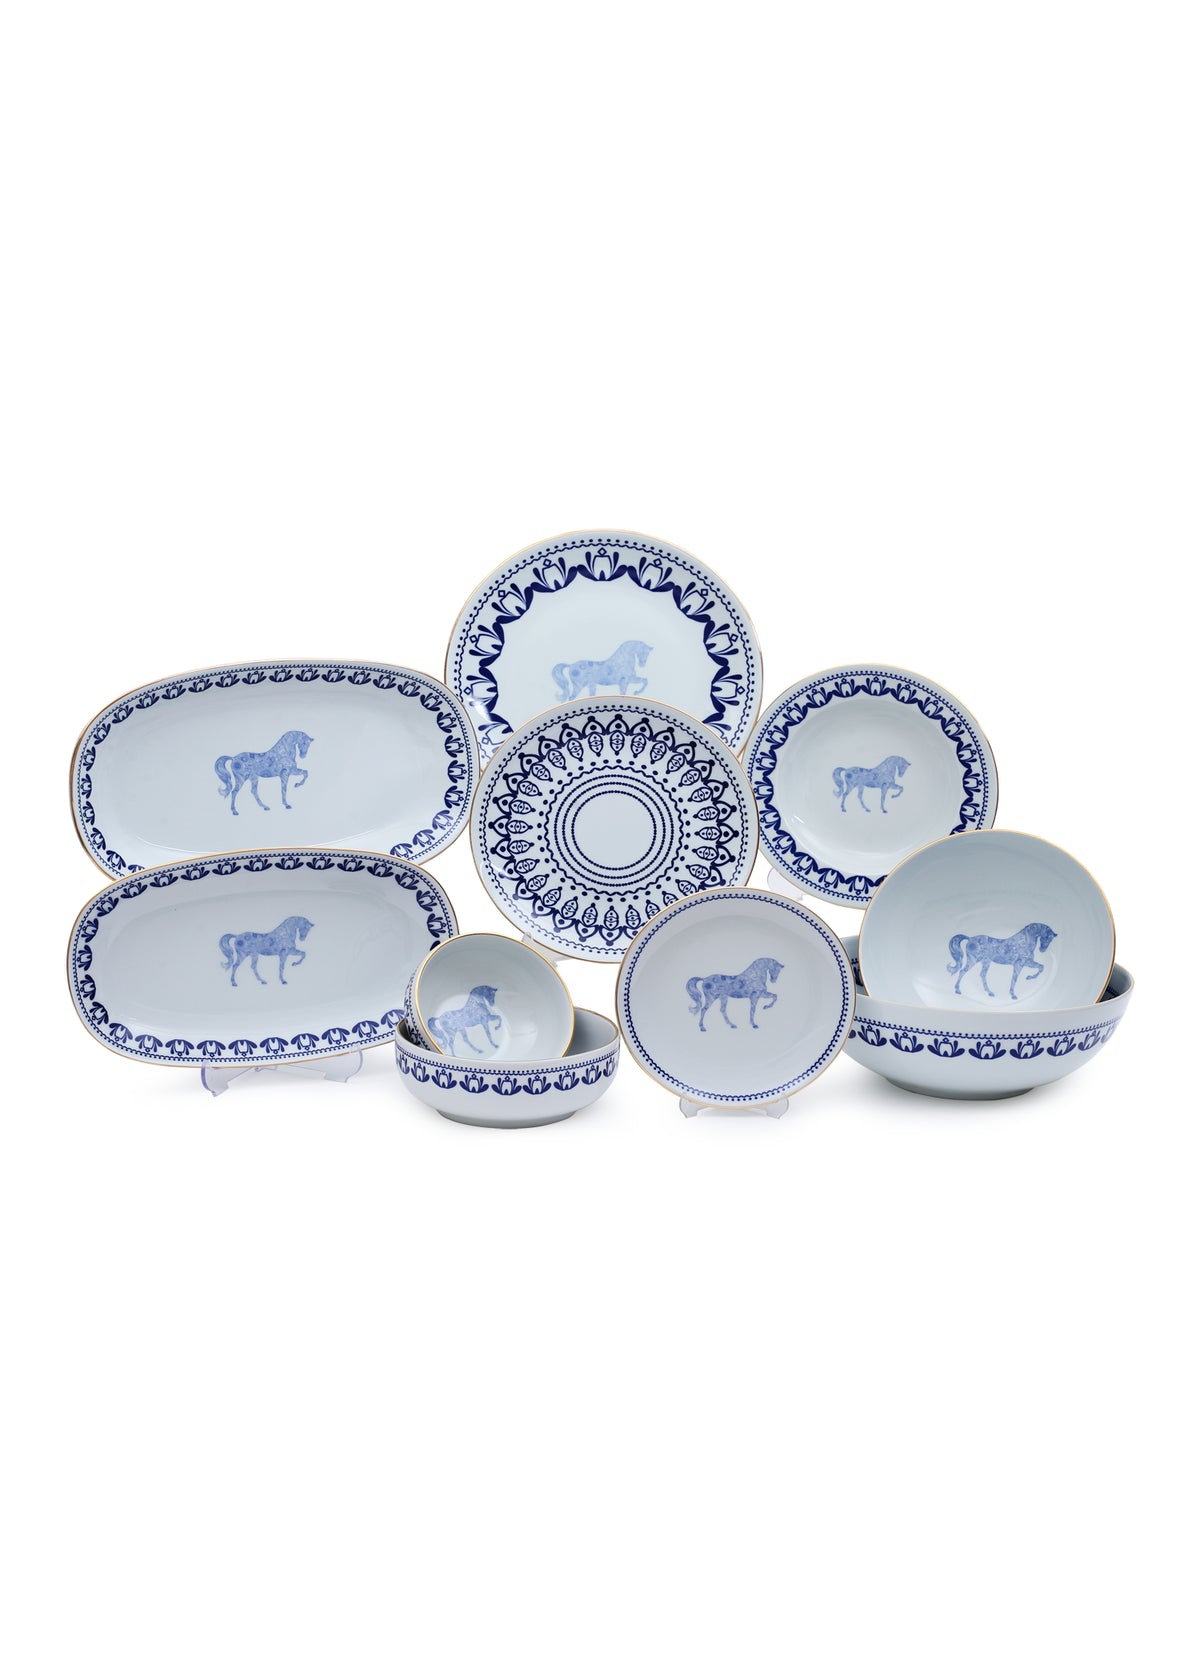 Horse Luck Collection-Blue Set of 8 Plates (58 pieces)